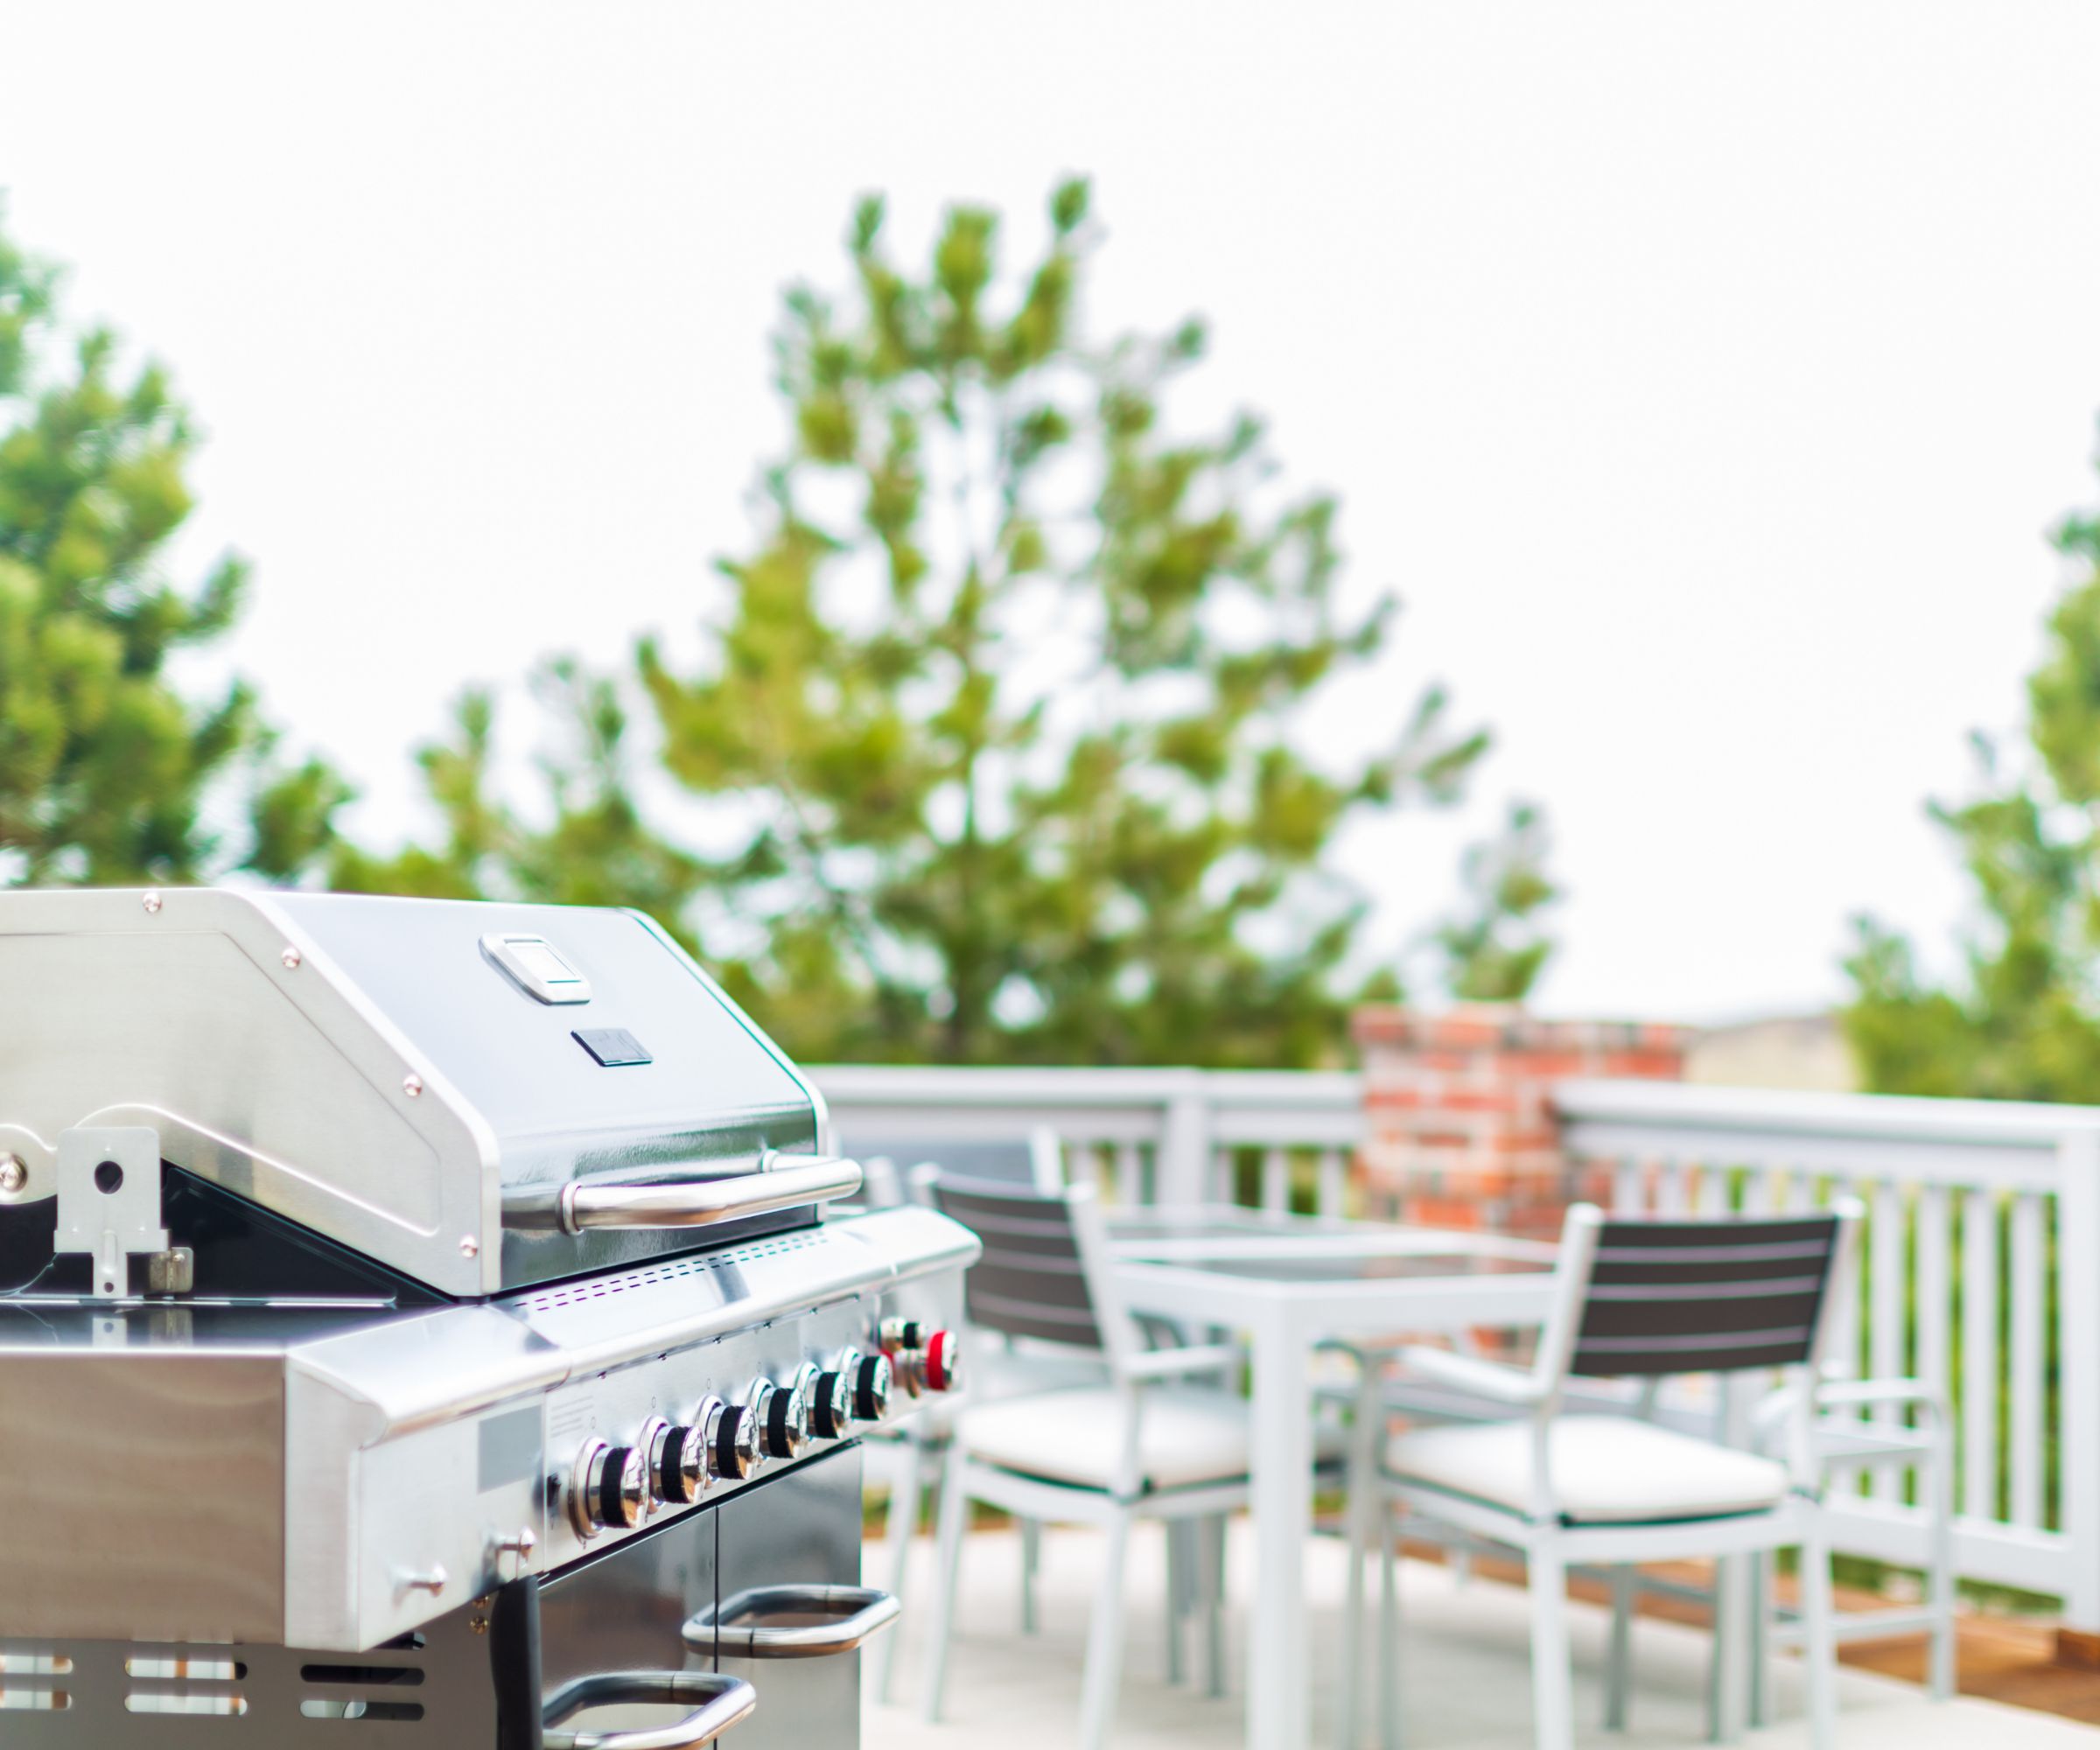 A gas grill on a deck